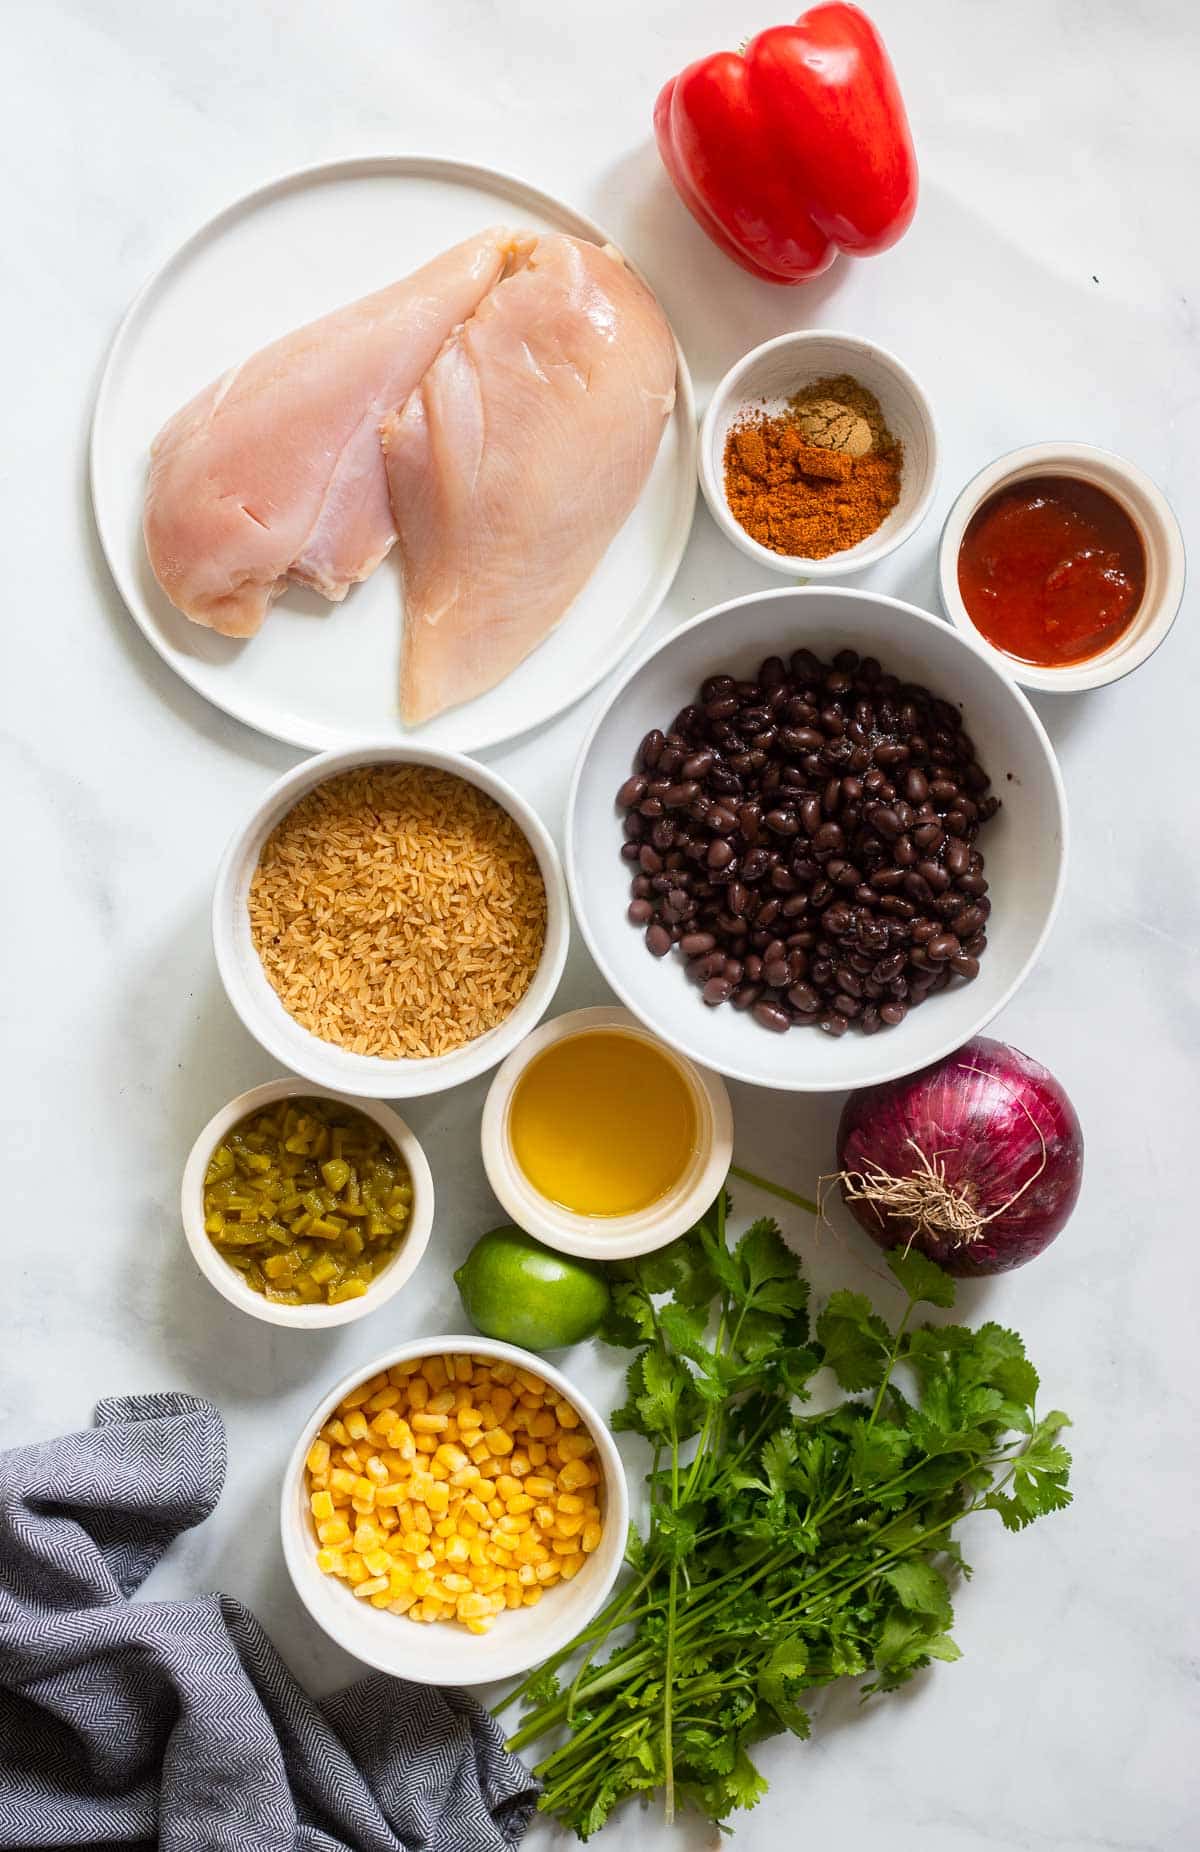 chipotle chicken bowl ingredients in white dishes on a white background.